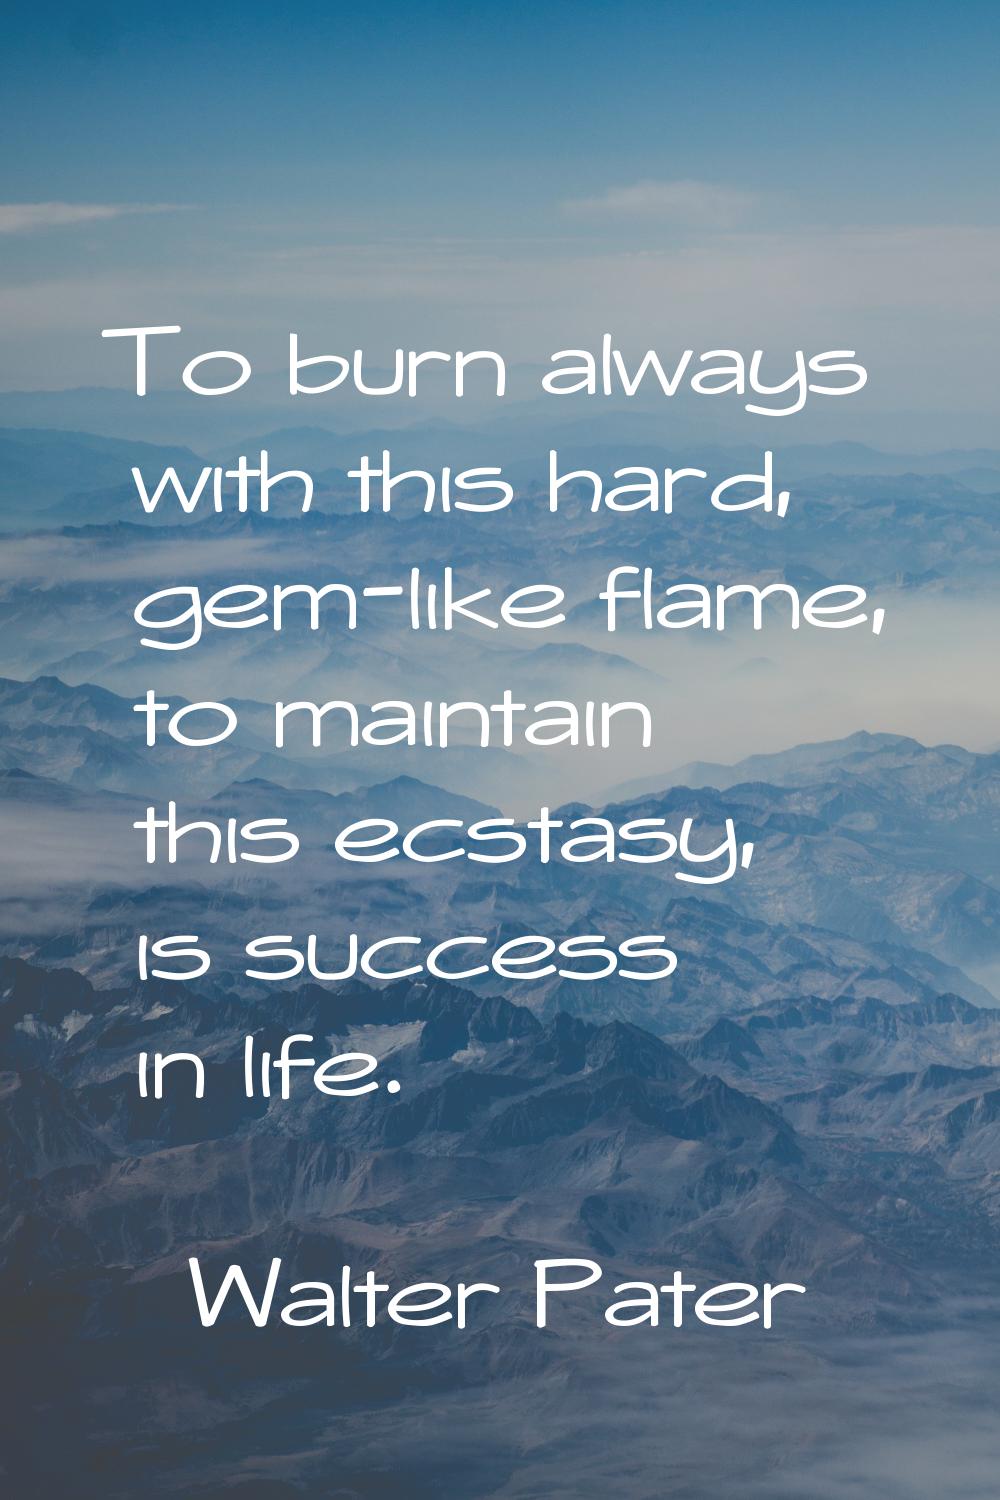 To burn always with this hard, gem-like flame, to maintain this ecstasy, is success in life.